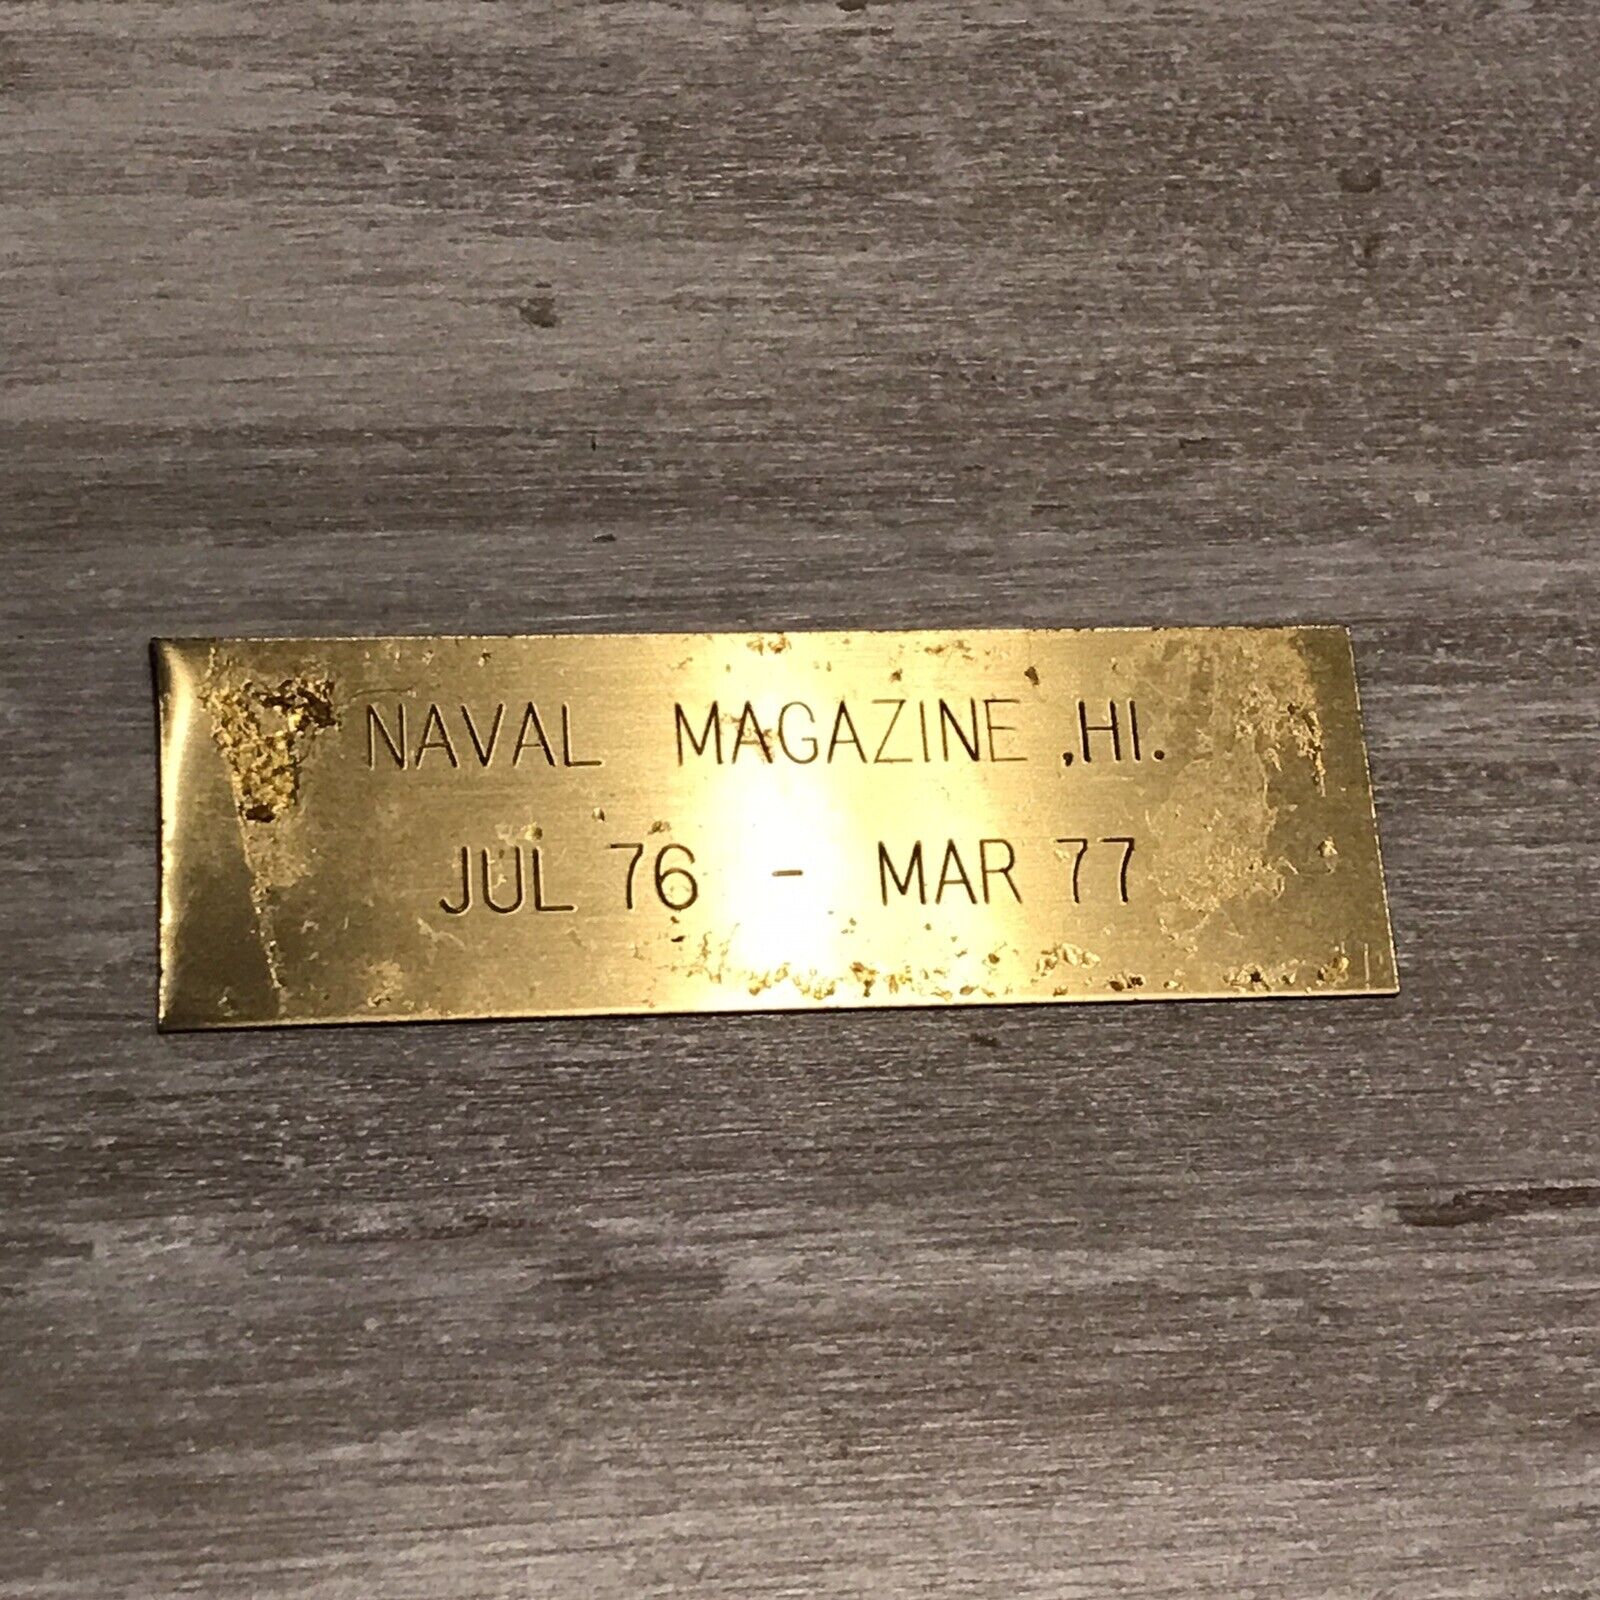 Naval Magazine Hawaii Brass Ship Name Plate July 1976 To March 1977